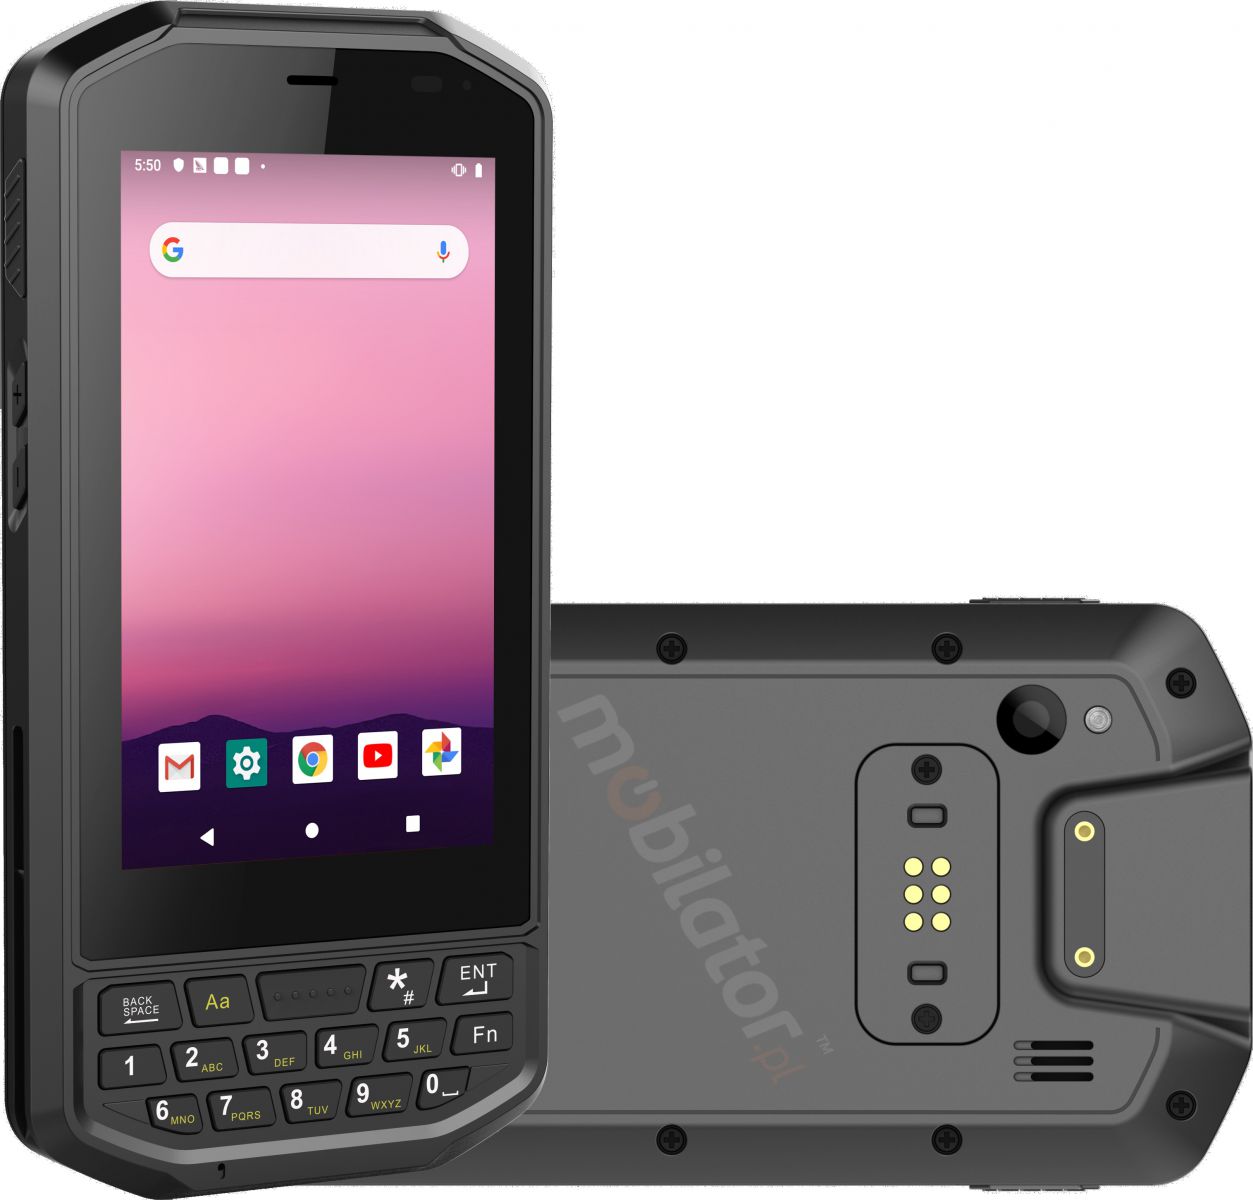 Industrial, water resistant (IP65 + MIL-STD-810G) data collector with 4GB RAM memory and 64GB ROM disk and 2D Zebra 4710 code reader - Mobipad Qxtron 4100 v.4 